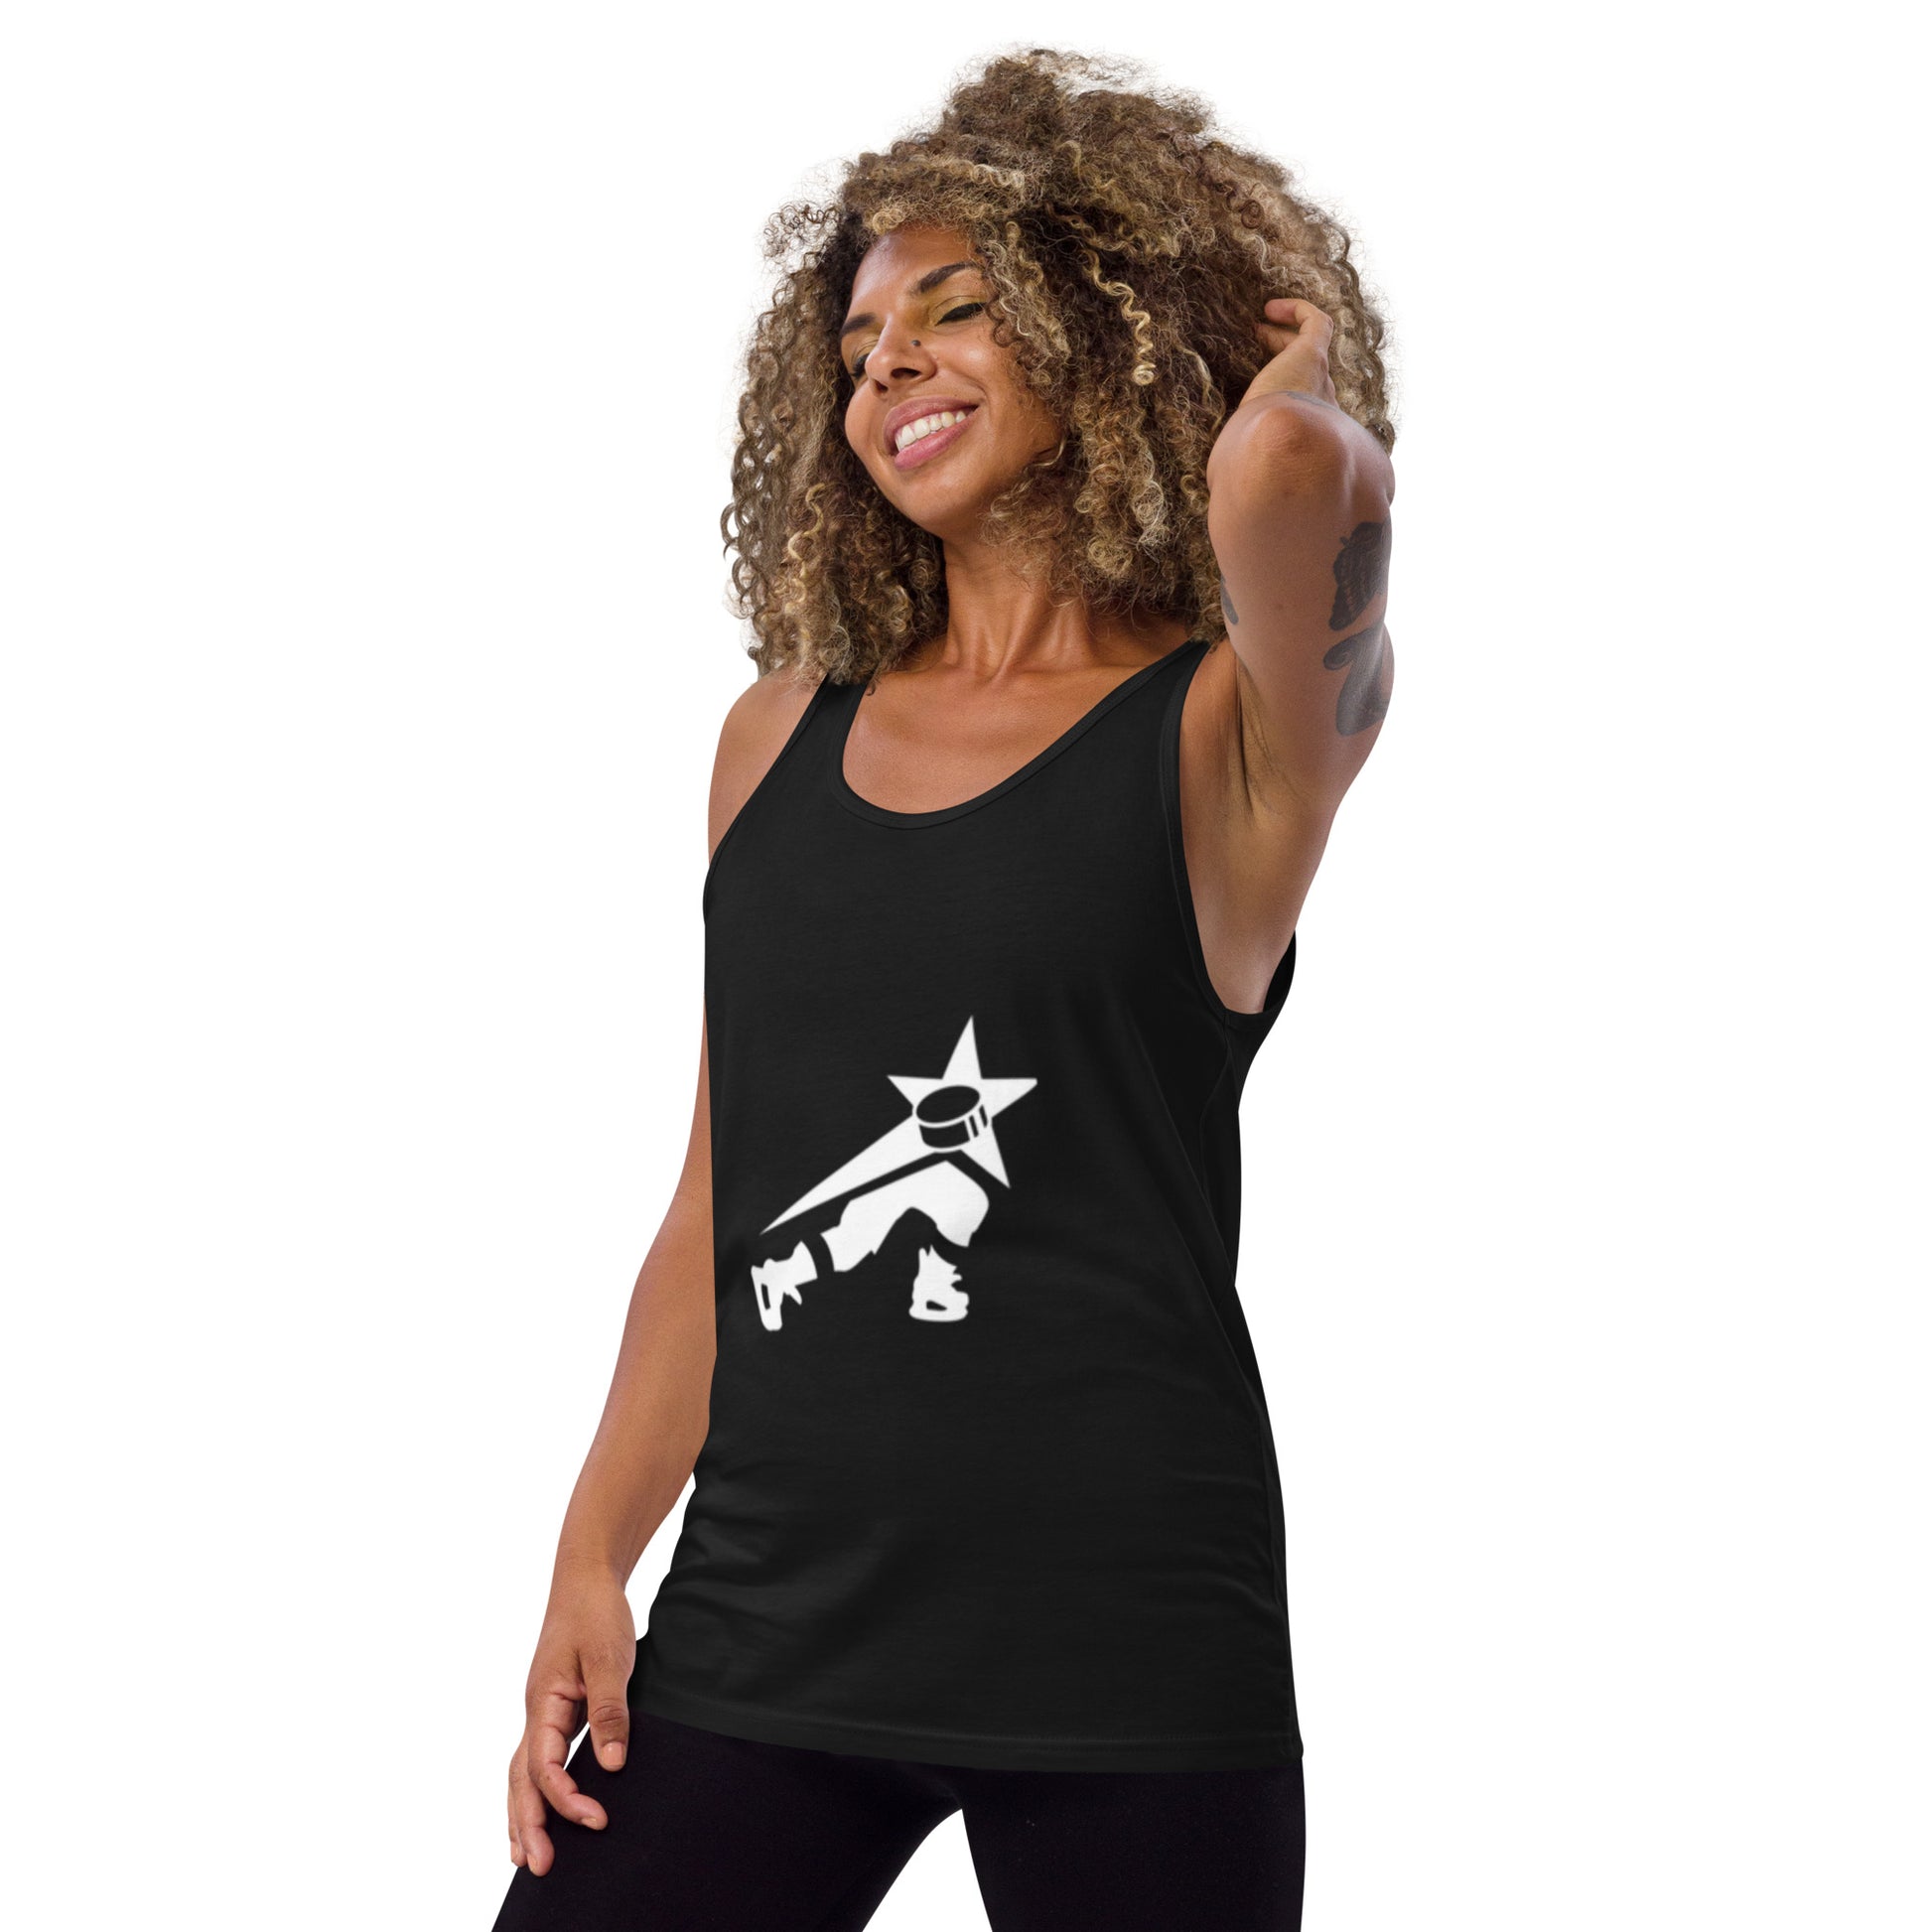 Radiant woman with curly hair smiling, wearing a black tank top featuring a white graphic of a stylized character with a star head and dynamic pose.